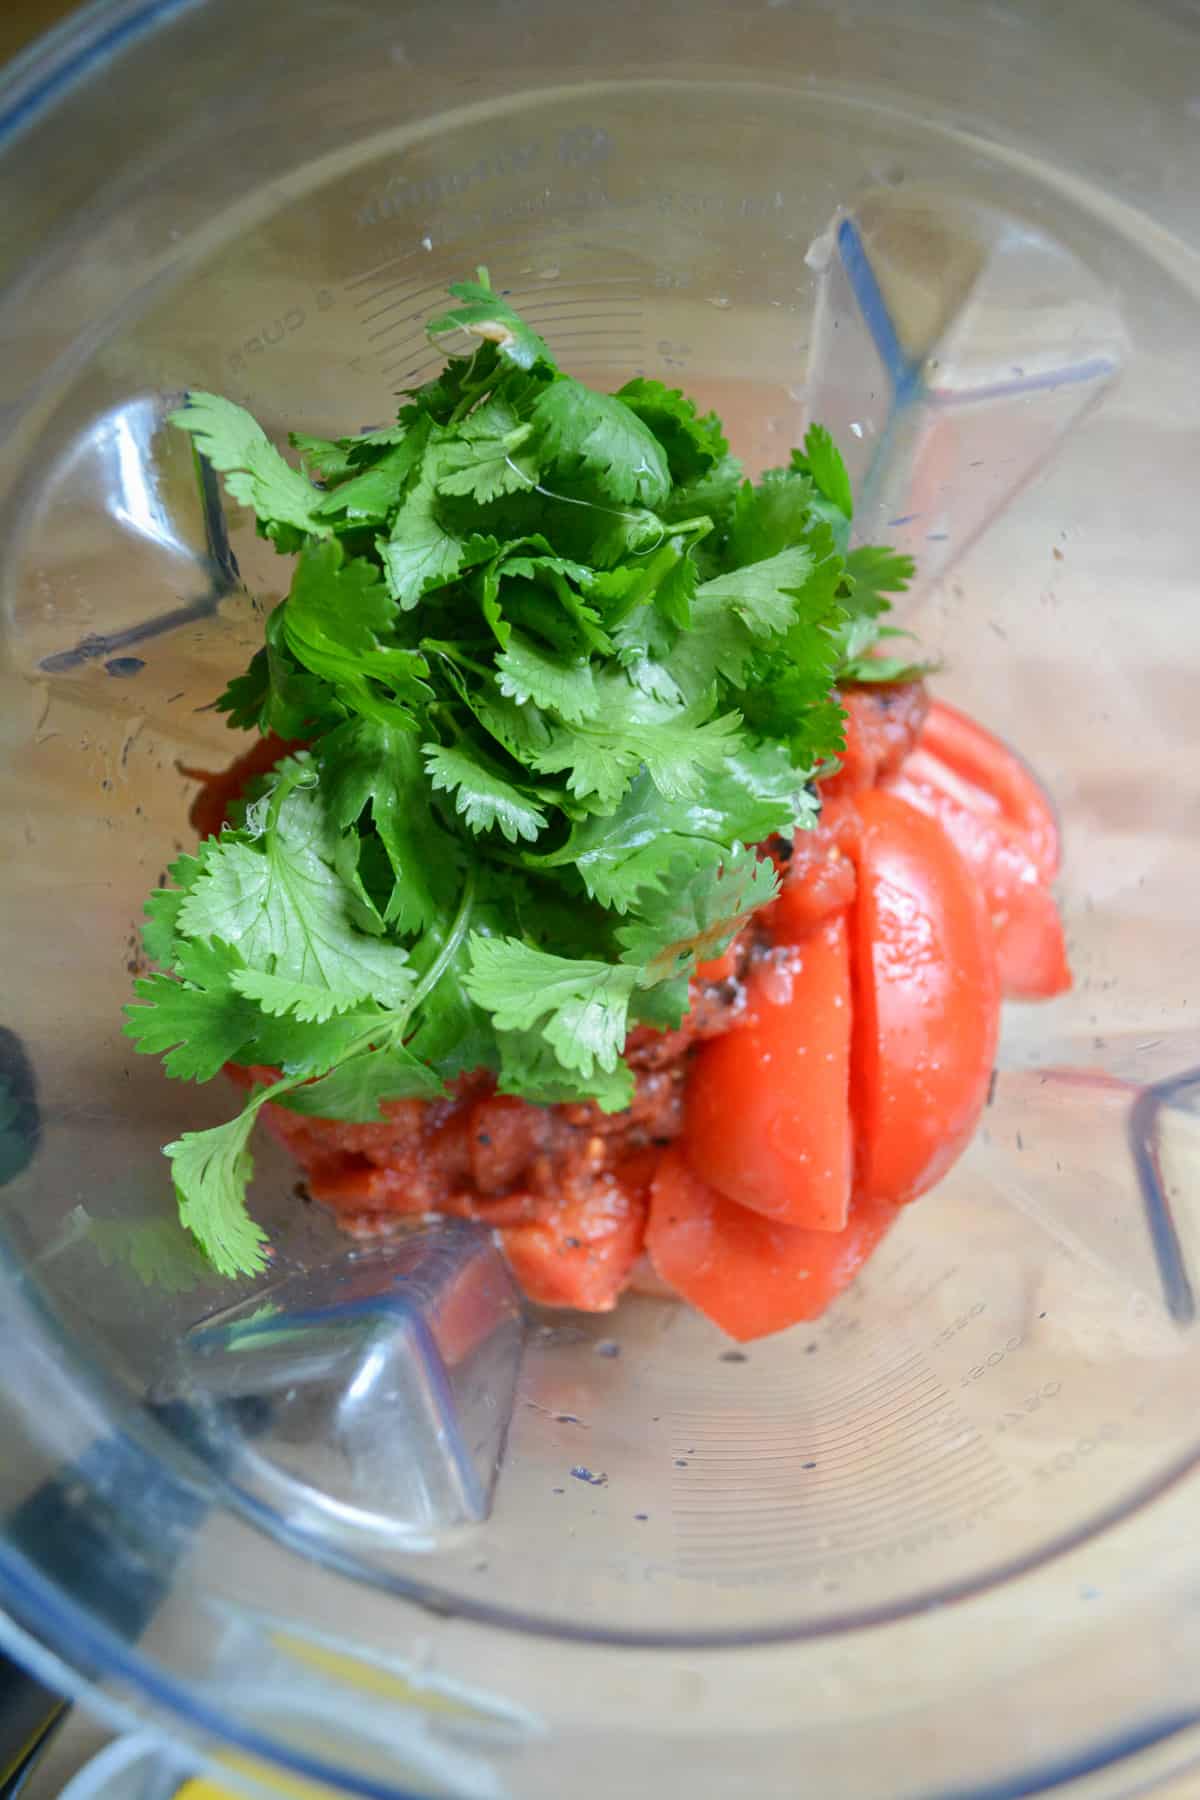 Cilantro added into the blender